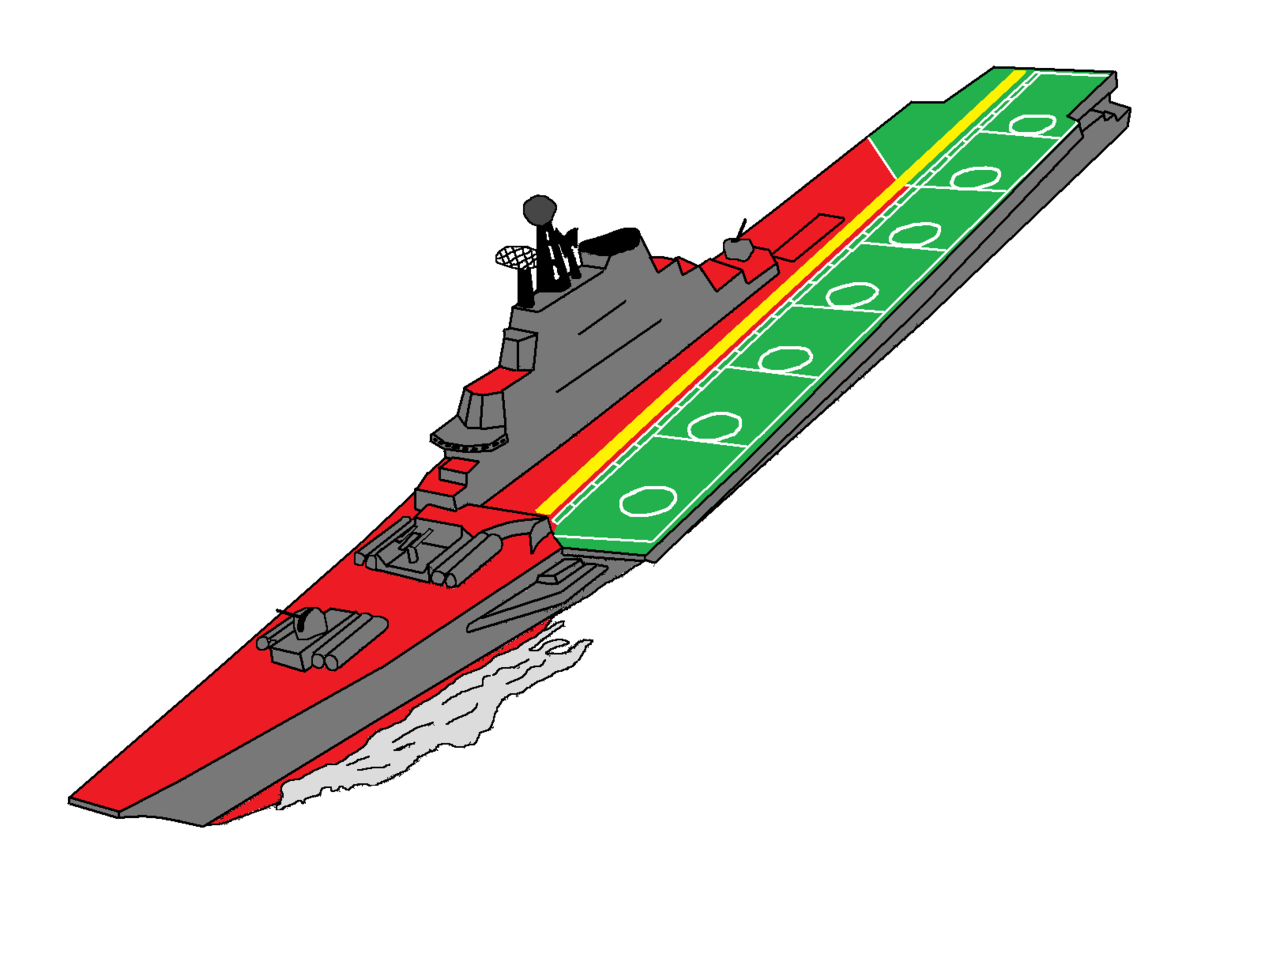 Project 1143 carrier simple drawing